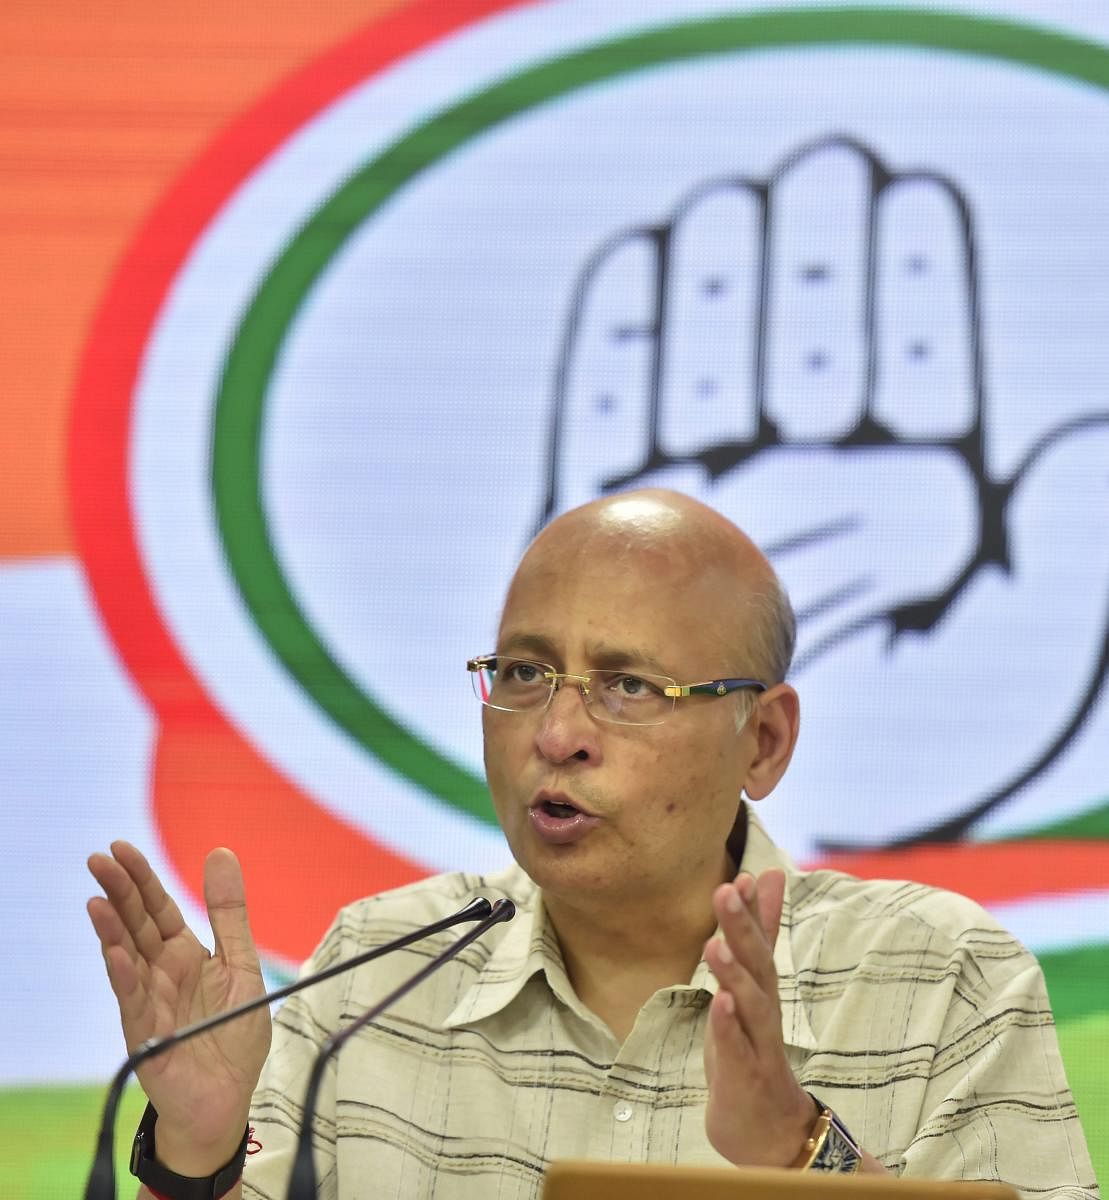 Congress spokesperson Abhishek Singhvi accused the BJP of diverting the people's attention from its failures. (PTI Photo)